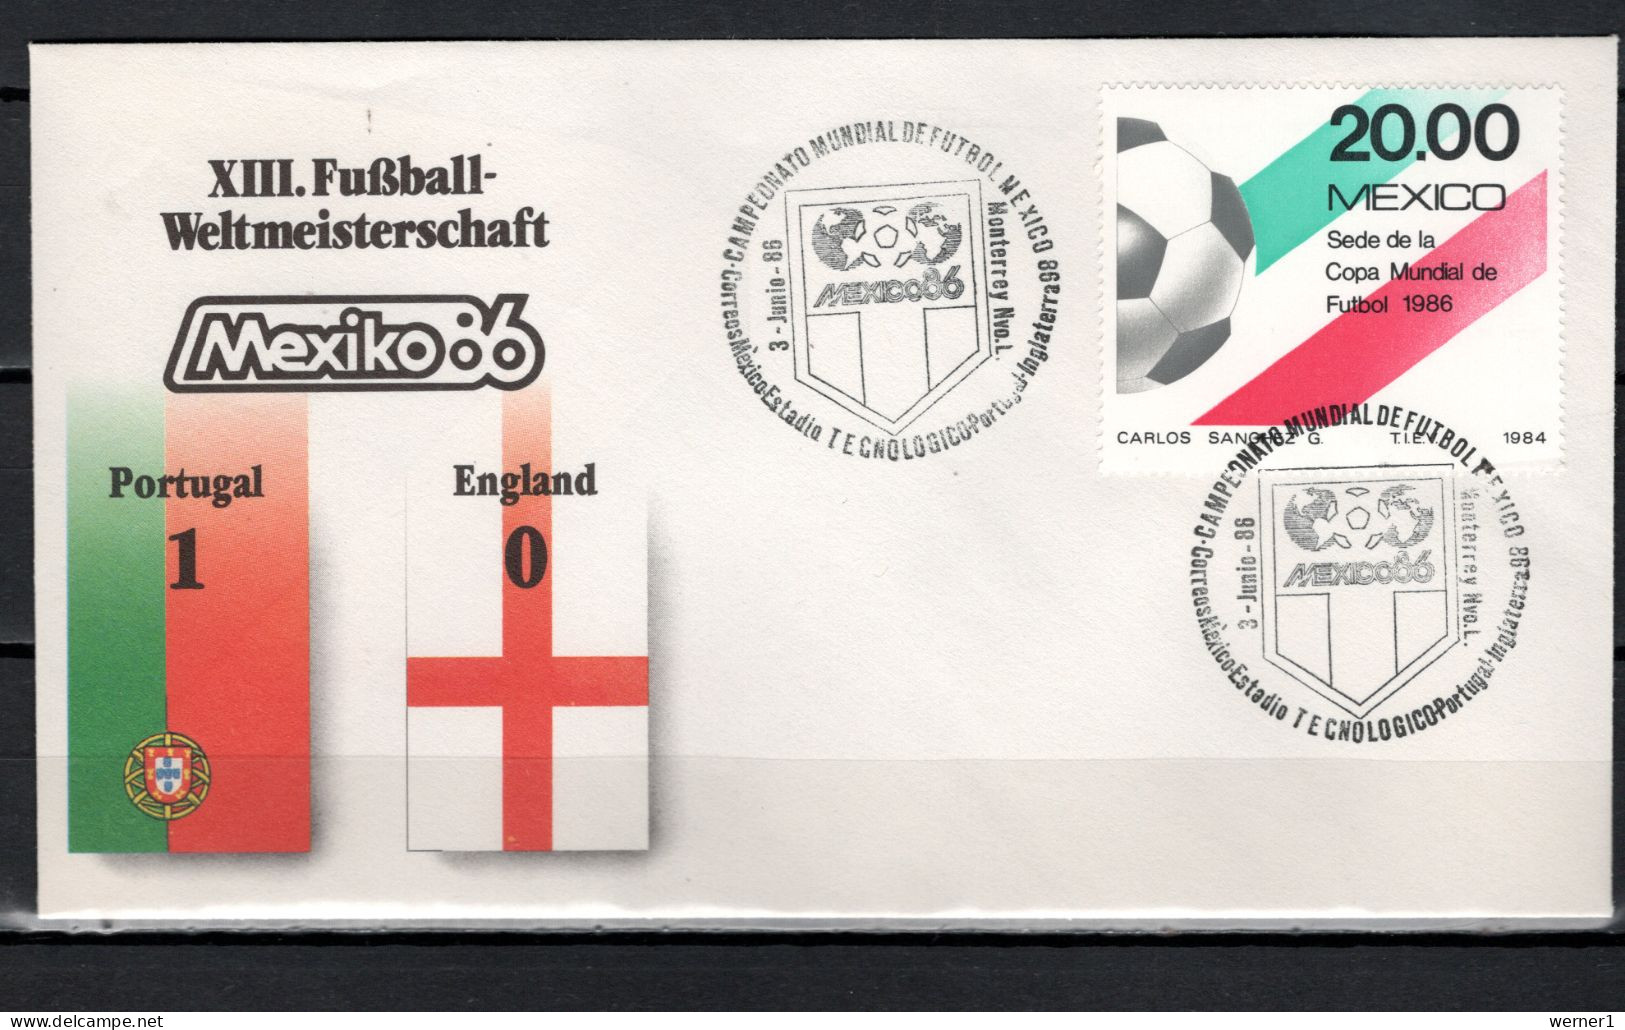 Mexico 1986 Football Soccer World Cup Commemorative Cover Match Portugal - England 1 : 0 - 1986 – Messico